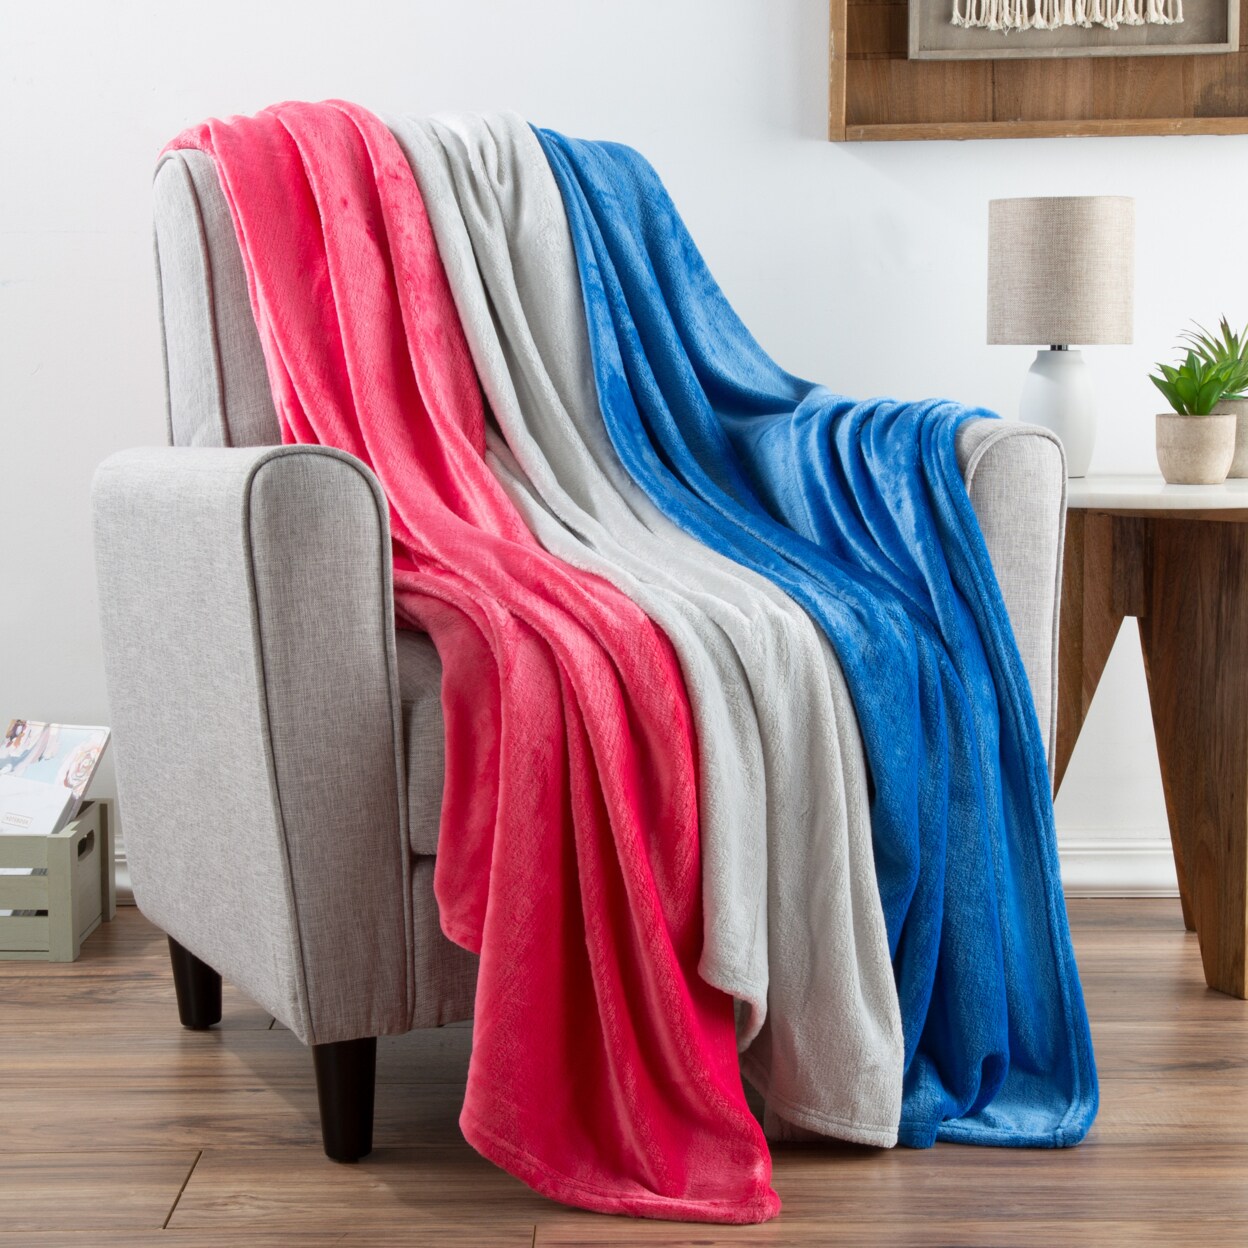 Lavish Home Fleece Throw Blanket- Set of 3- Blue Gray and Pink Plush 60 x 50 Throw Blankets- Soft and Cozy